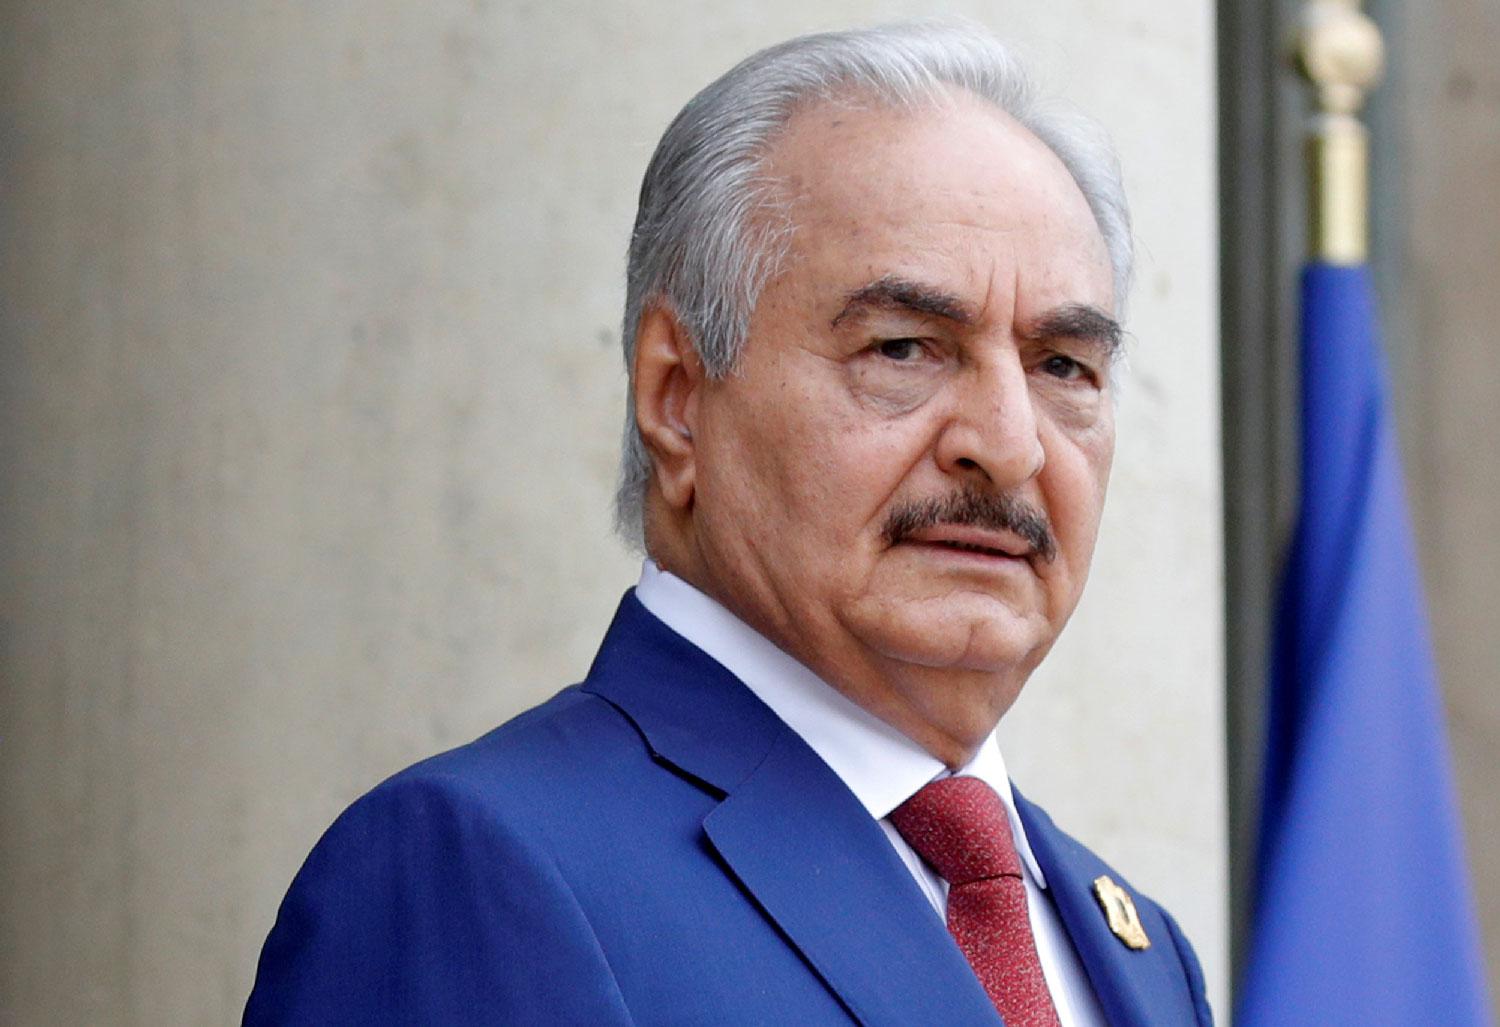 Khalifa Haftar, the military commander who dominates eastern Libya, arrives to attend an international conference on Libya at the Elysee Palace in Paris, France, May 29, 2018.